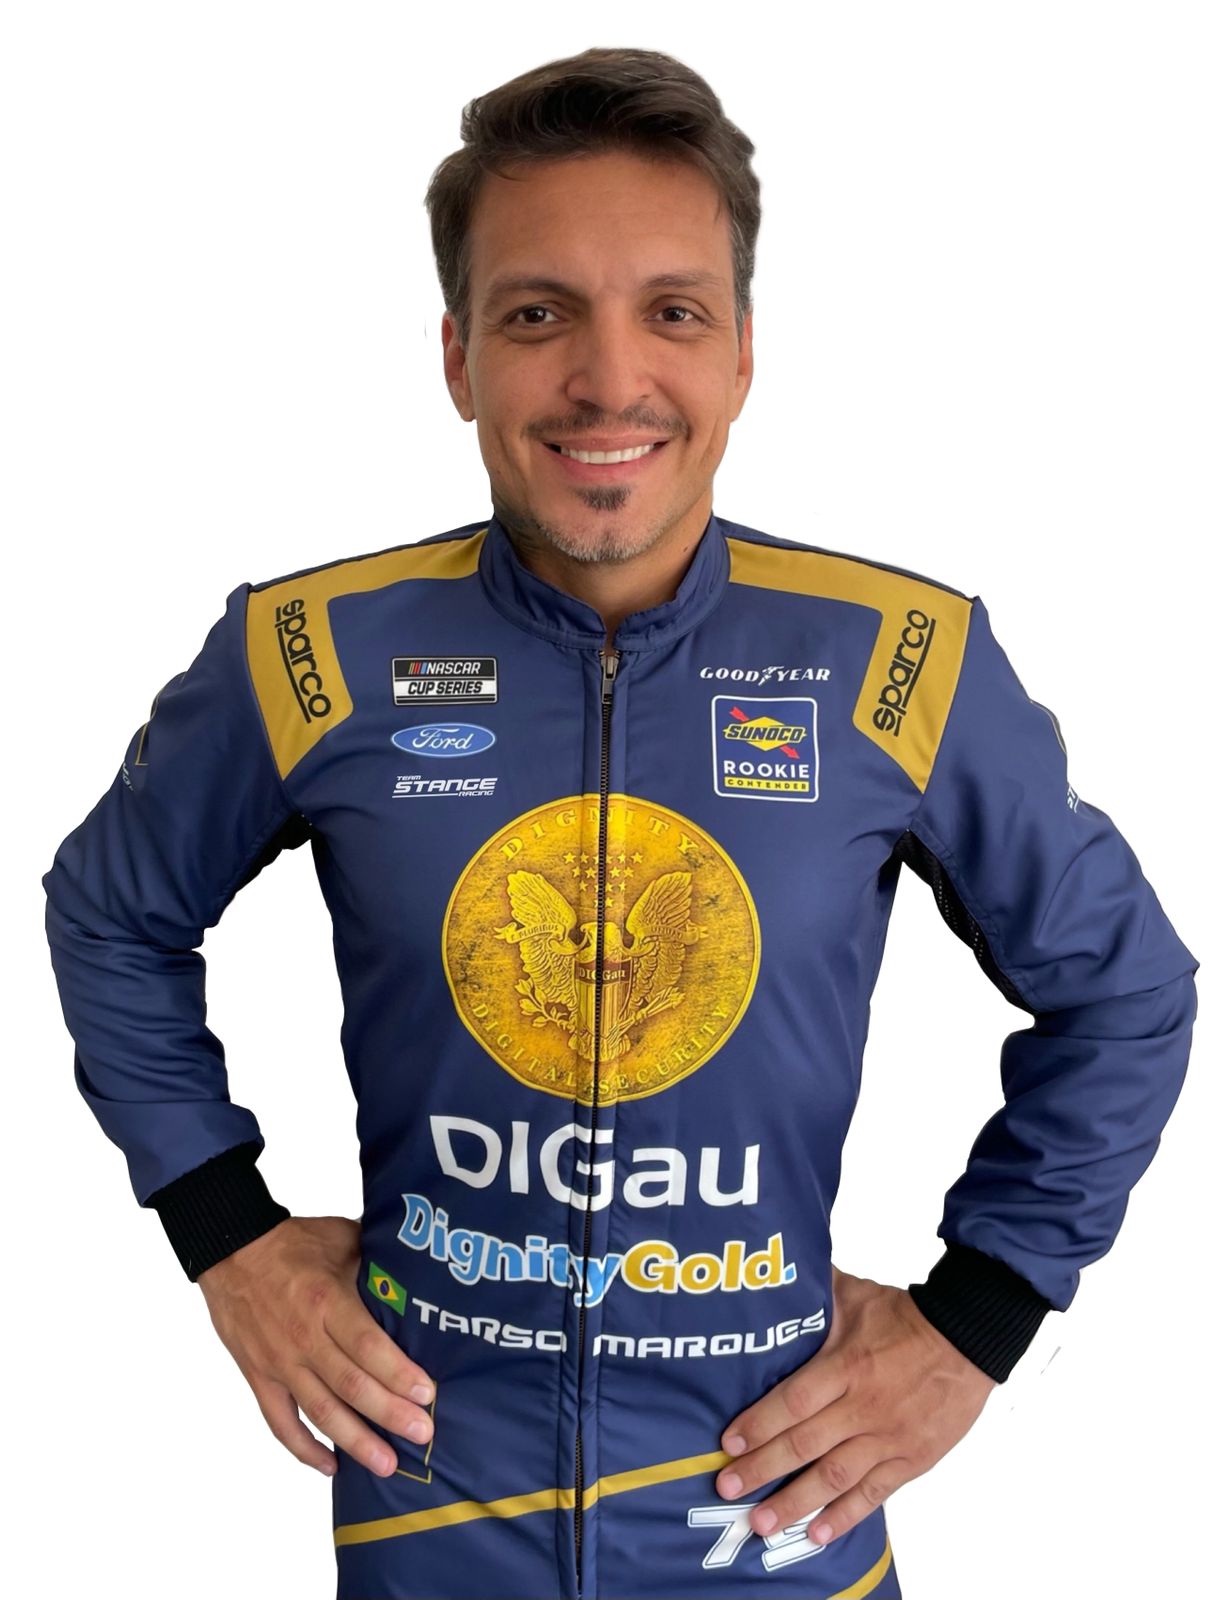 NASCAR: Team Stange Racing w/Dignity Gold enters Marques in GT